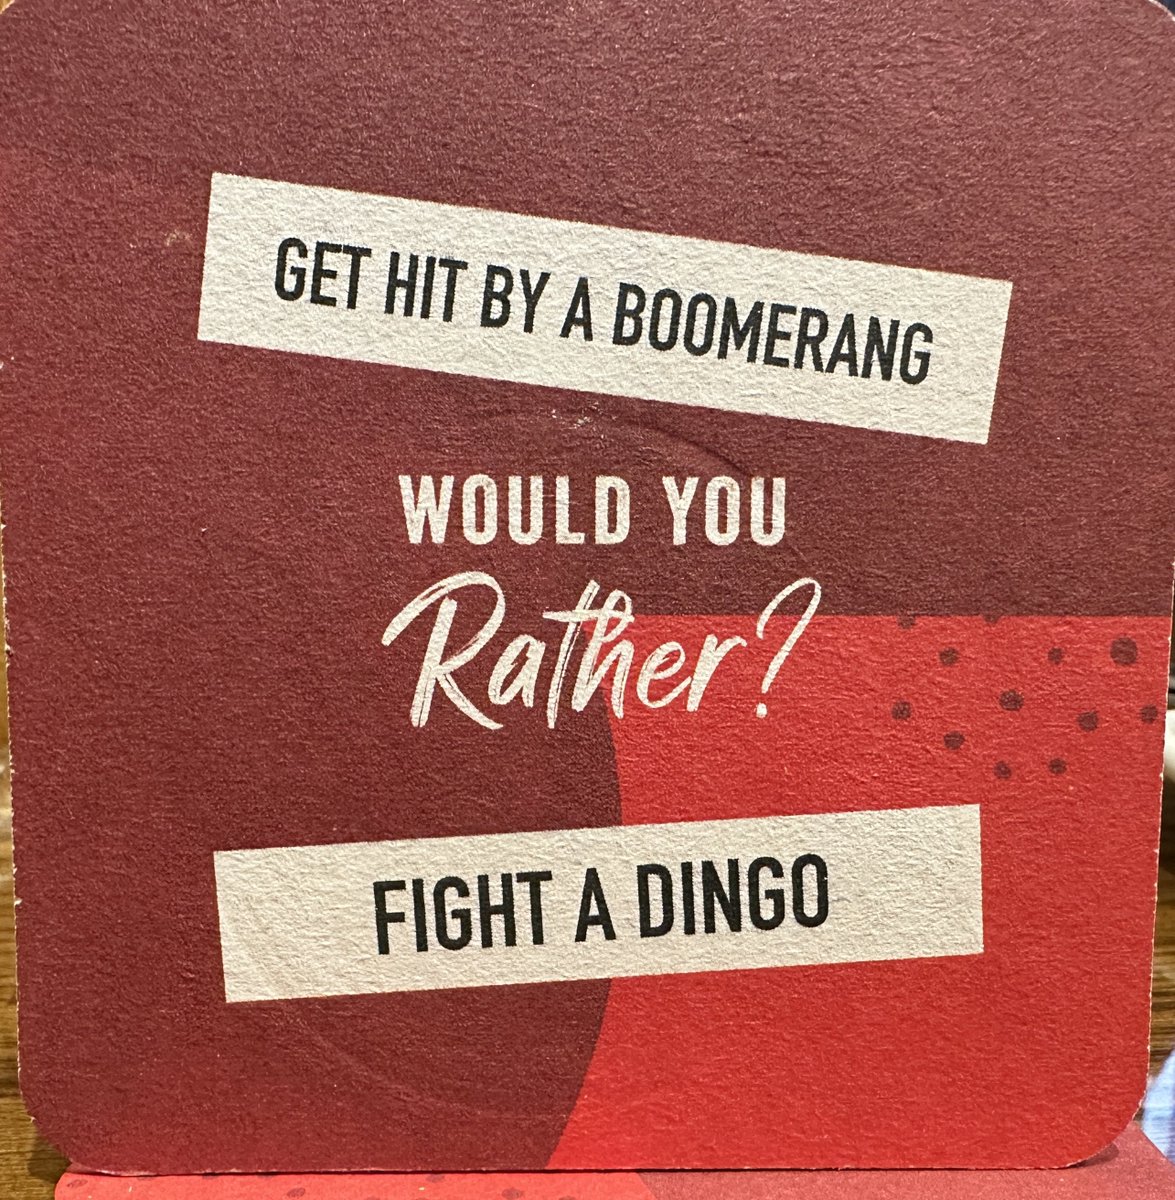 I’d say get hit by a #boomerang, because it only hits once. The #dingo would keep fighting.
What about you? 🤔 

#outbacksteakhouse #passingthetime #coasters #thisorthat #questionoftheday #travel #funtimes #fightingadingo #gettinghitwithboomerang #funny